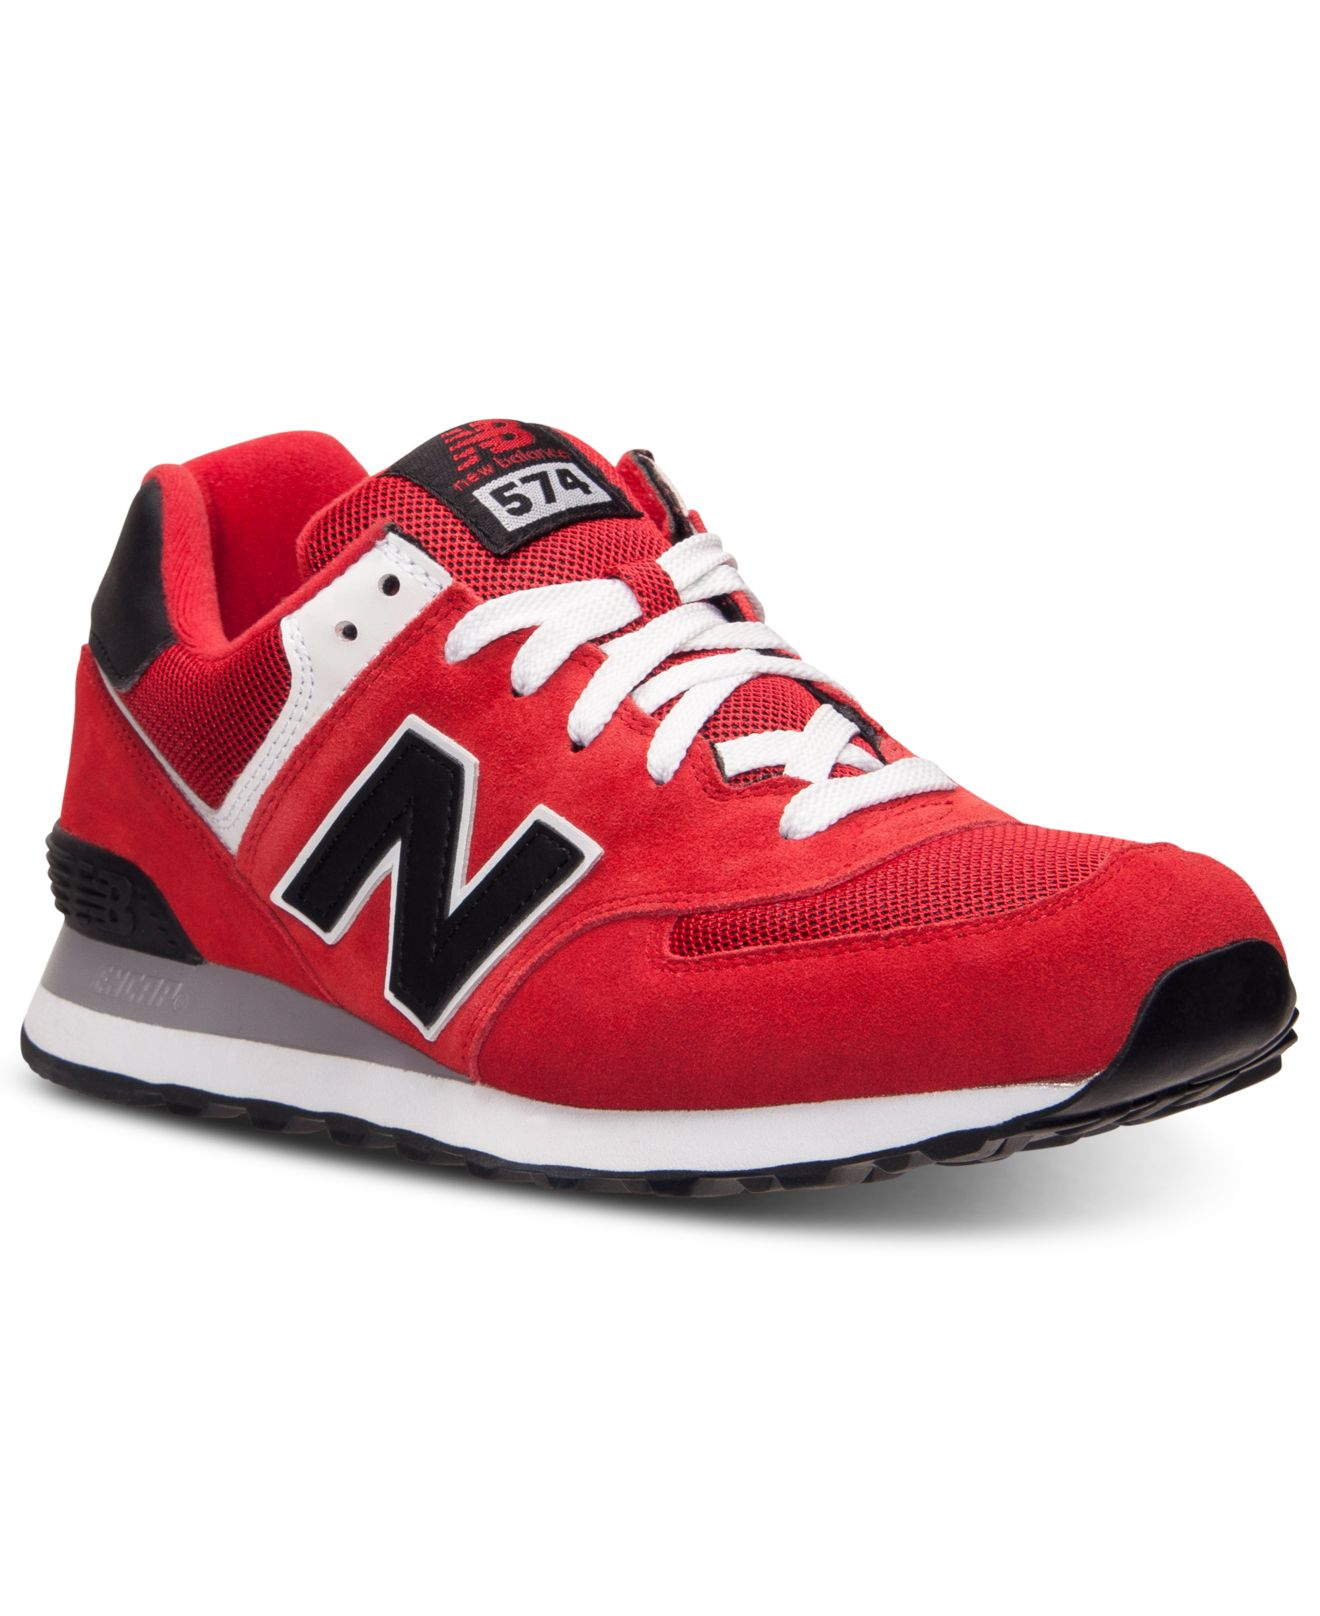 New Balance Men'S 574 Sneakers From Finish Line in Red/Black (Red) for ...